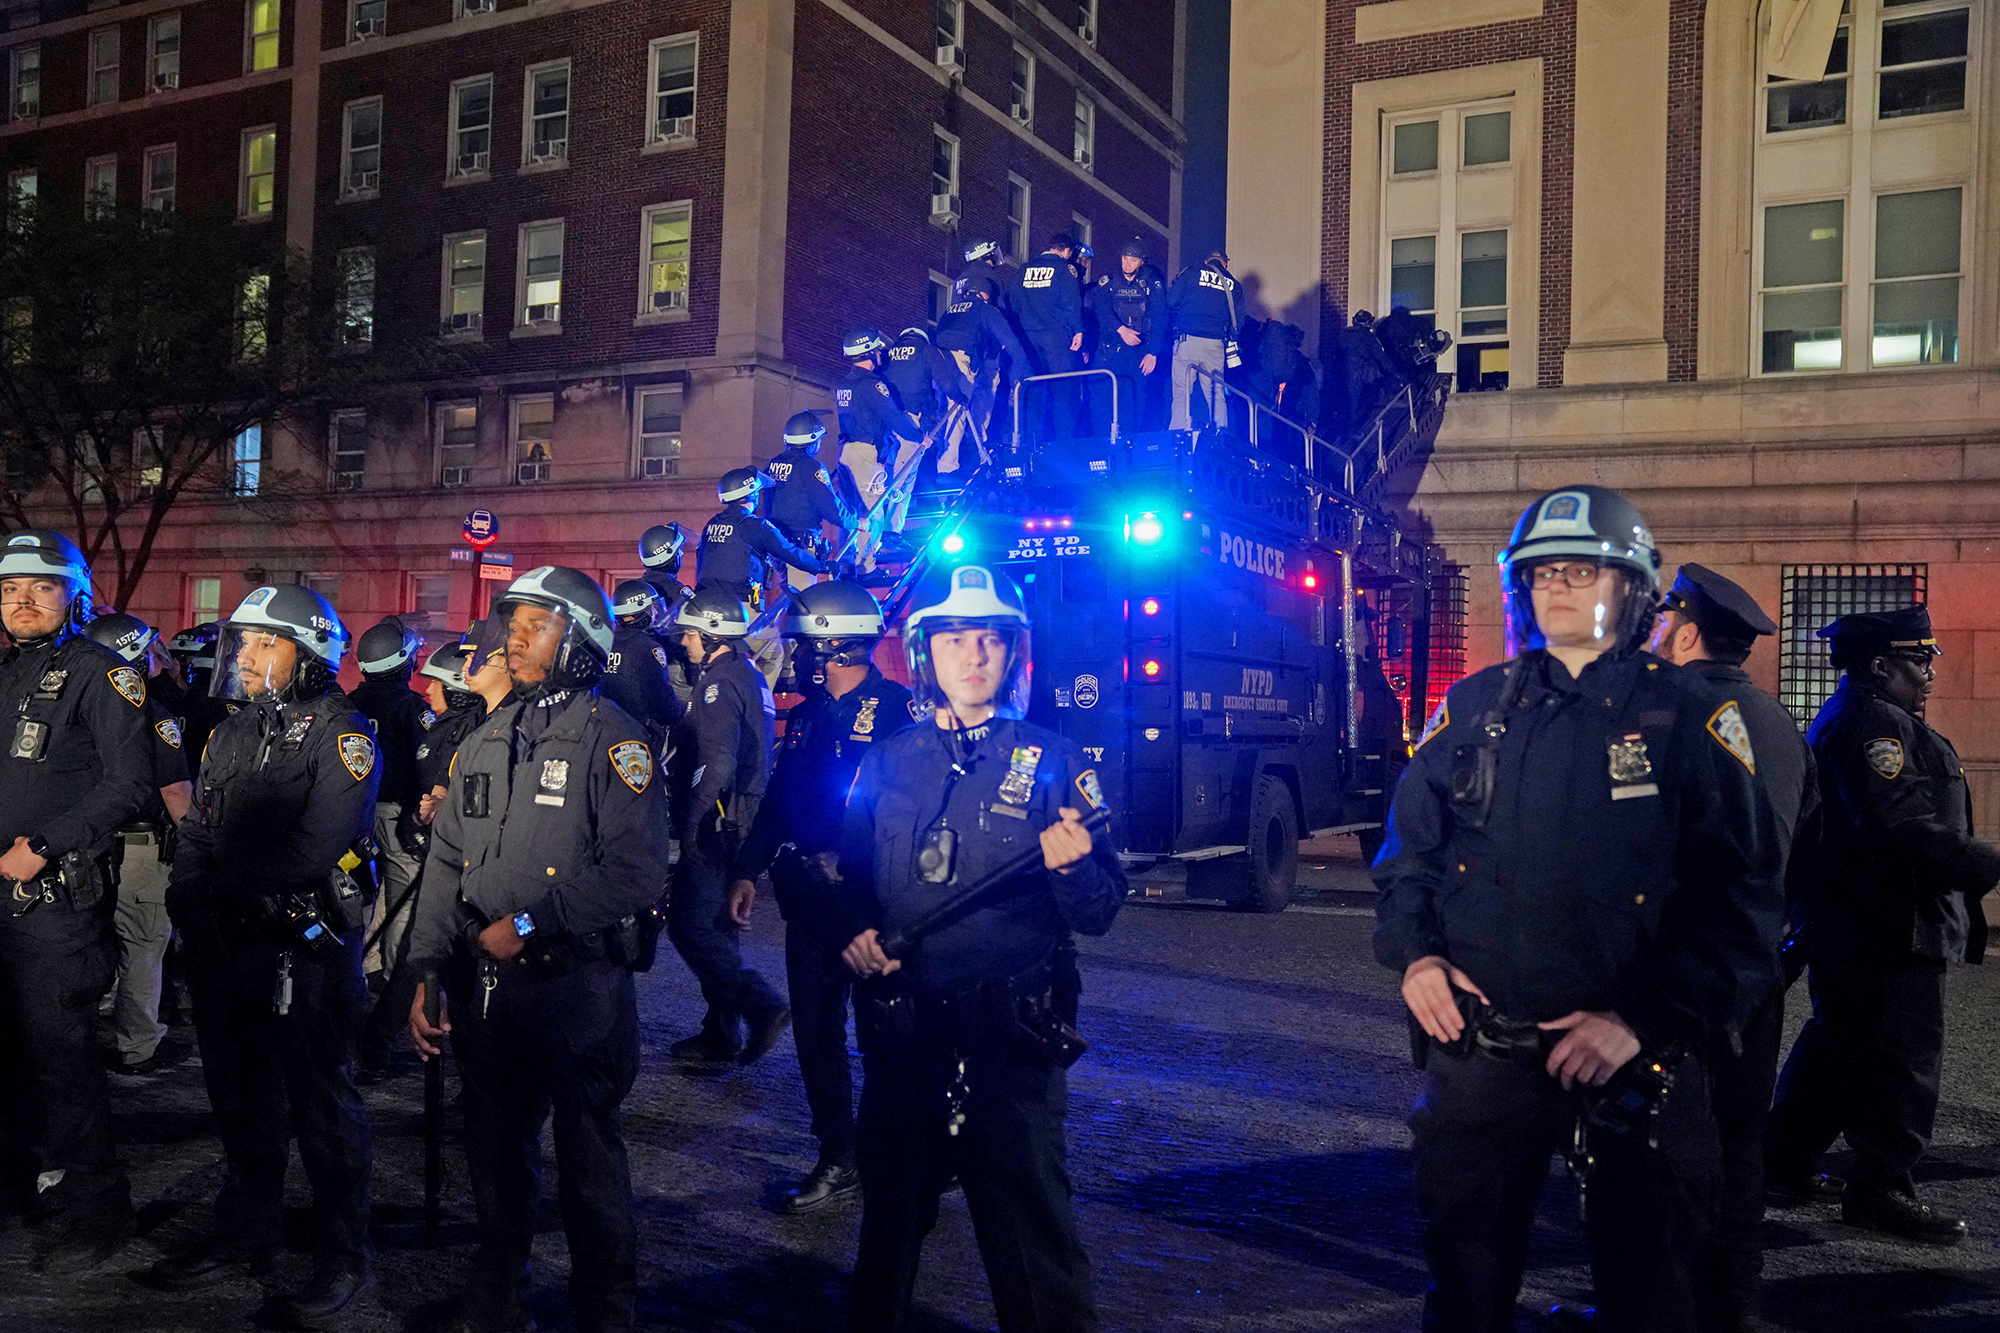 Police use a special vehicle to enter Hamilton Hall which protesters occupied, as other officers enter the campus of Columbia University in New York City, on April 30.